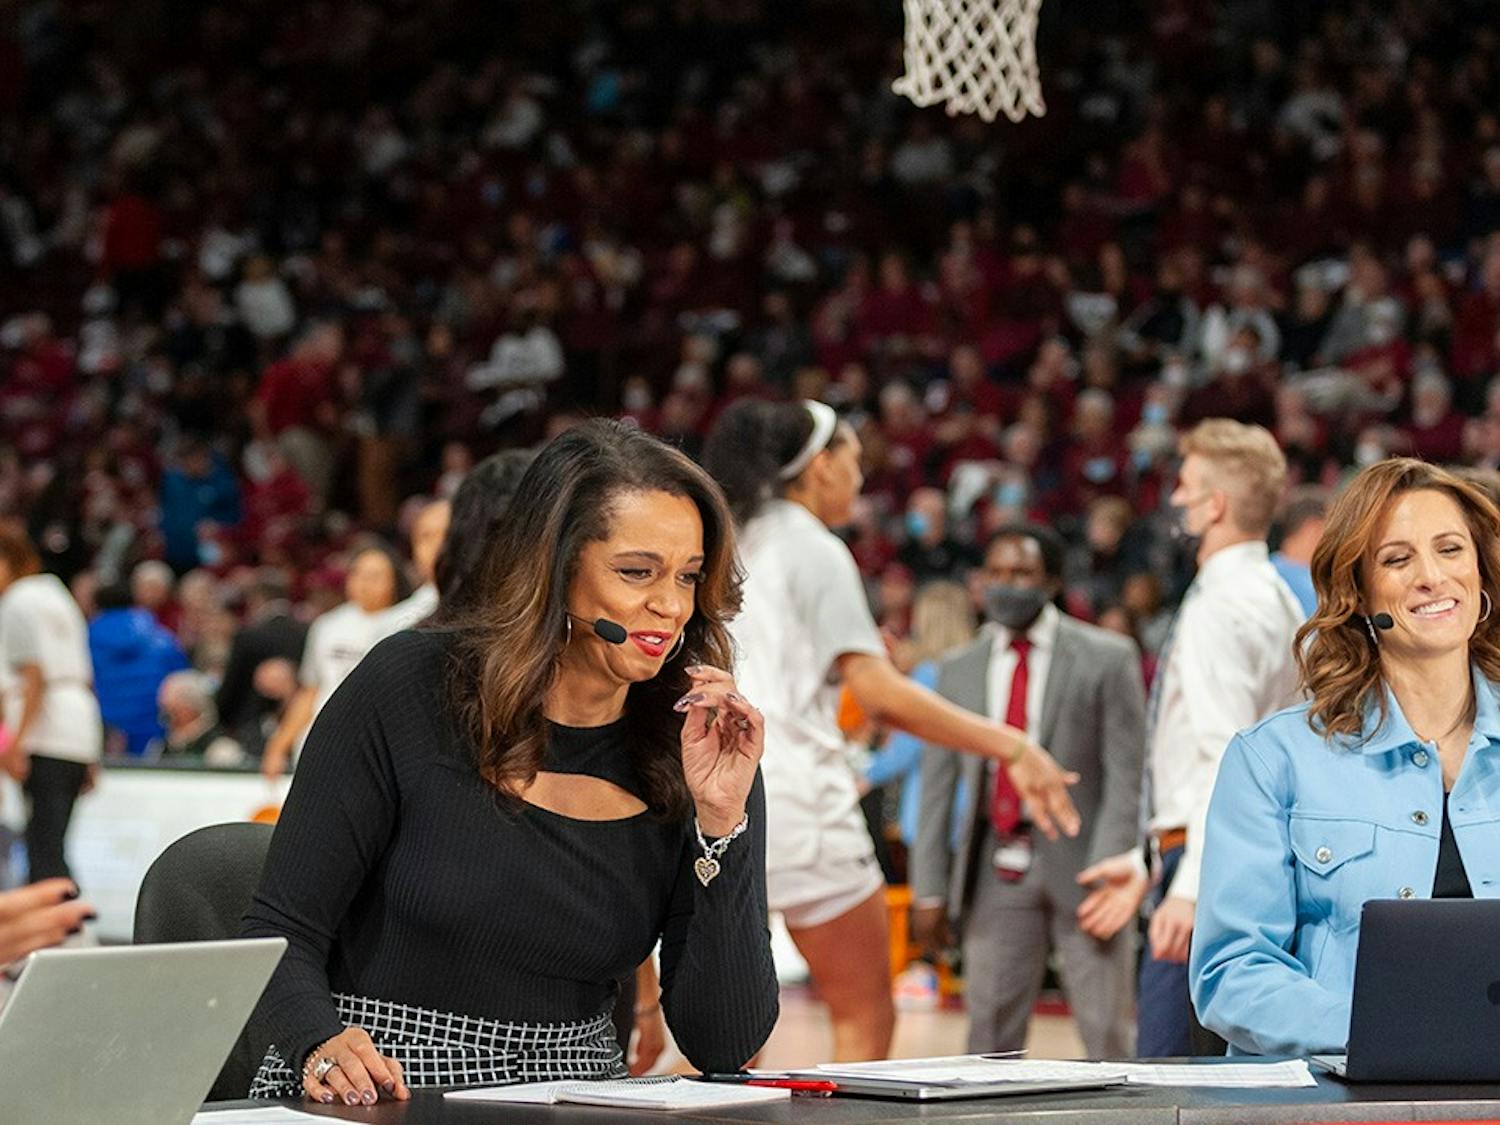 ESPN College GameDay came to Colonial Life Arena on Feb. 20, 2022, at the women's basketball game against Tennessee.